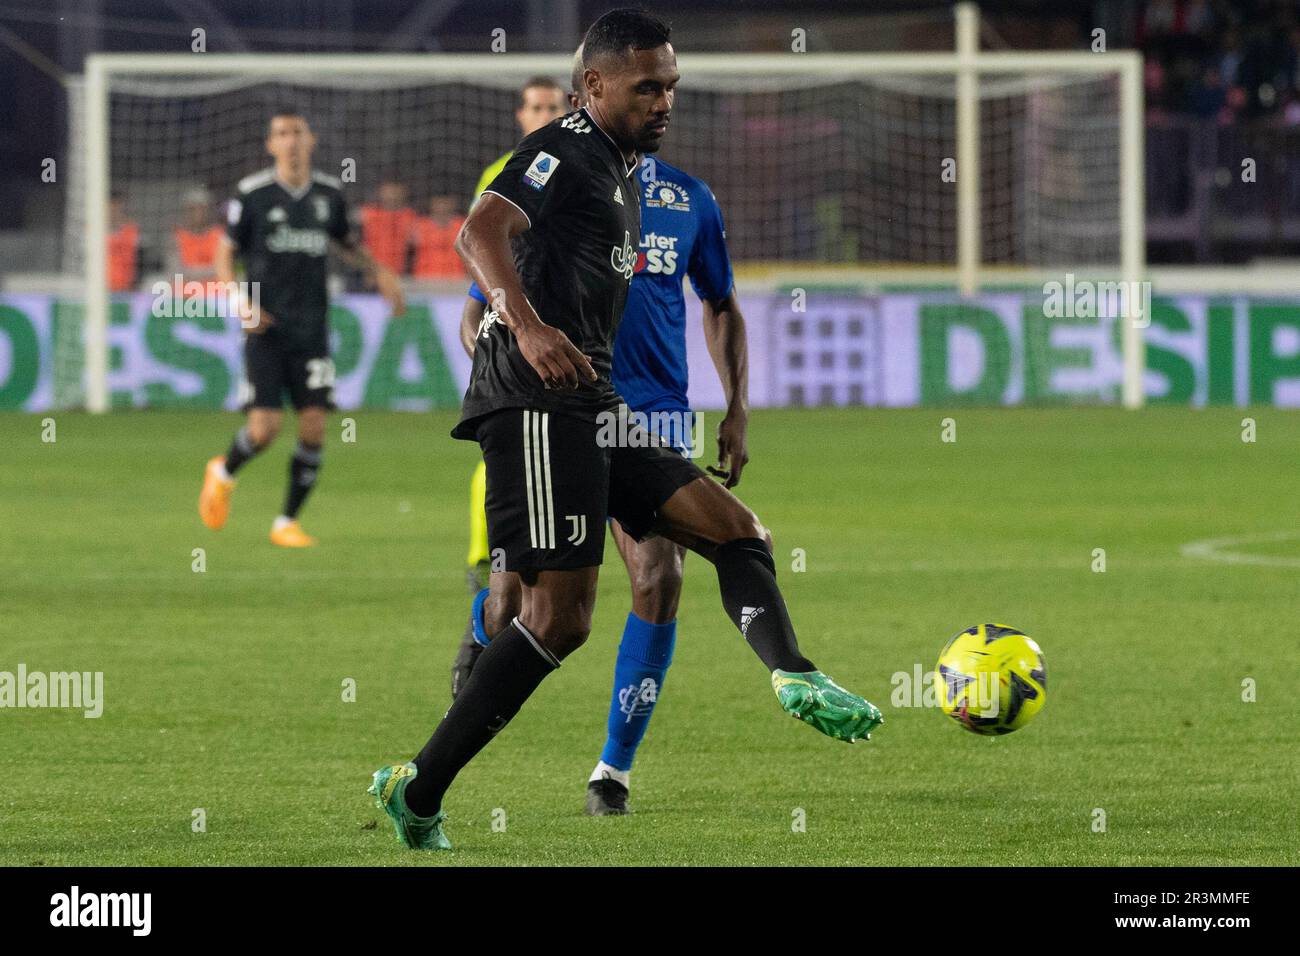 Empoli, Italy. 22nd May, 2023. Alex Sandro Lobo Silva Juventus shot during Empoli FC vs Juventus FC, italian soccer Serie A match in Empoli, Italy, May 22 2023 Credit: Independent Photo Agency/Alamy Live News Stock Photo